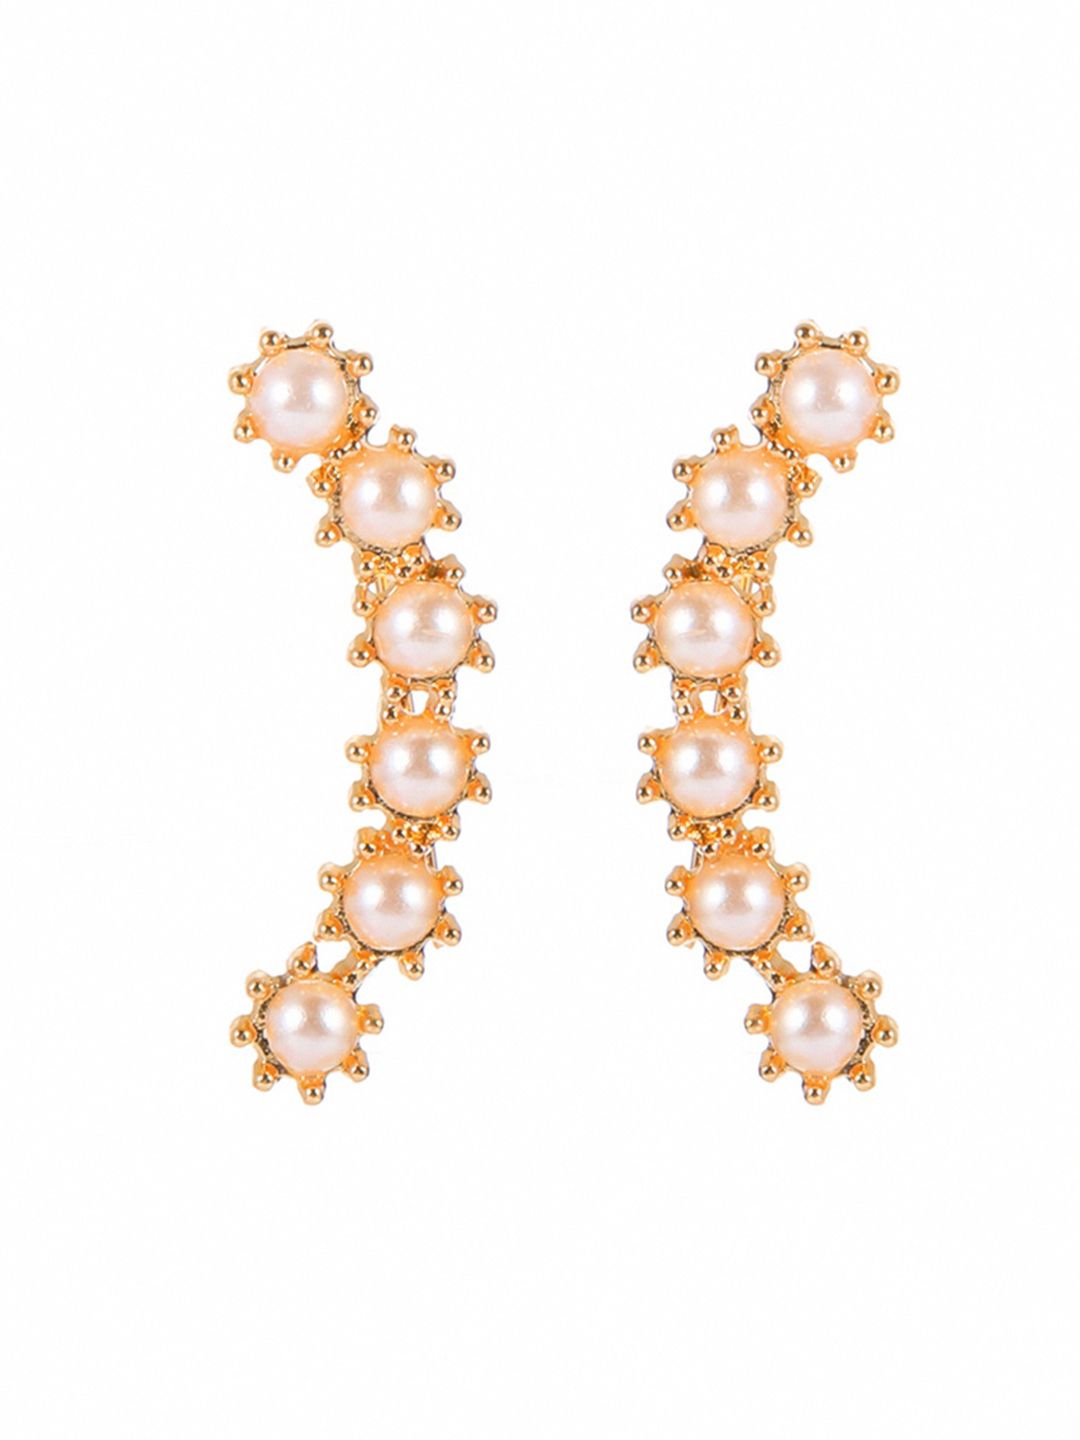 URBANIC Gold-Toned Contemporary Studs Earrings Price in India